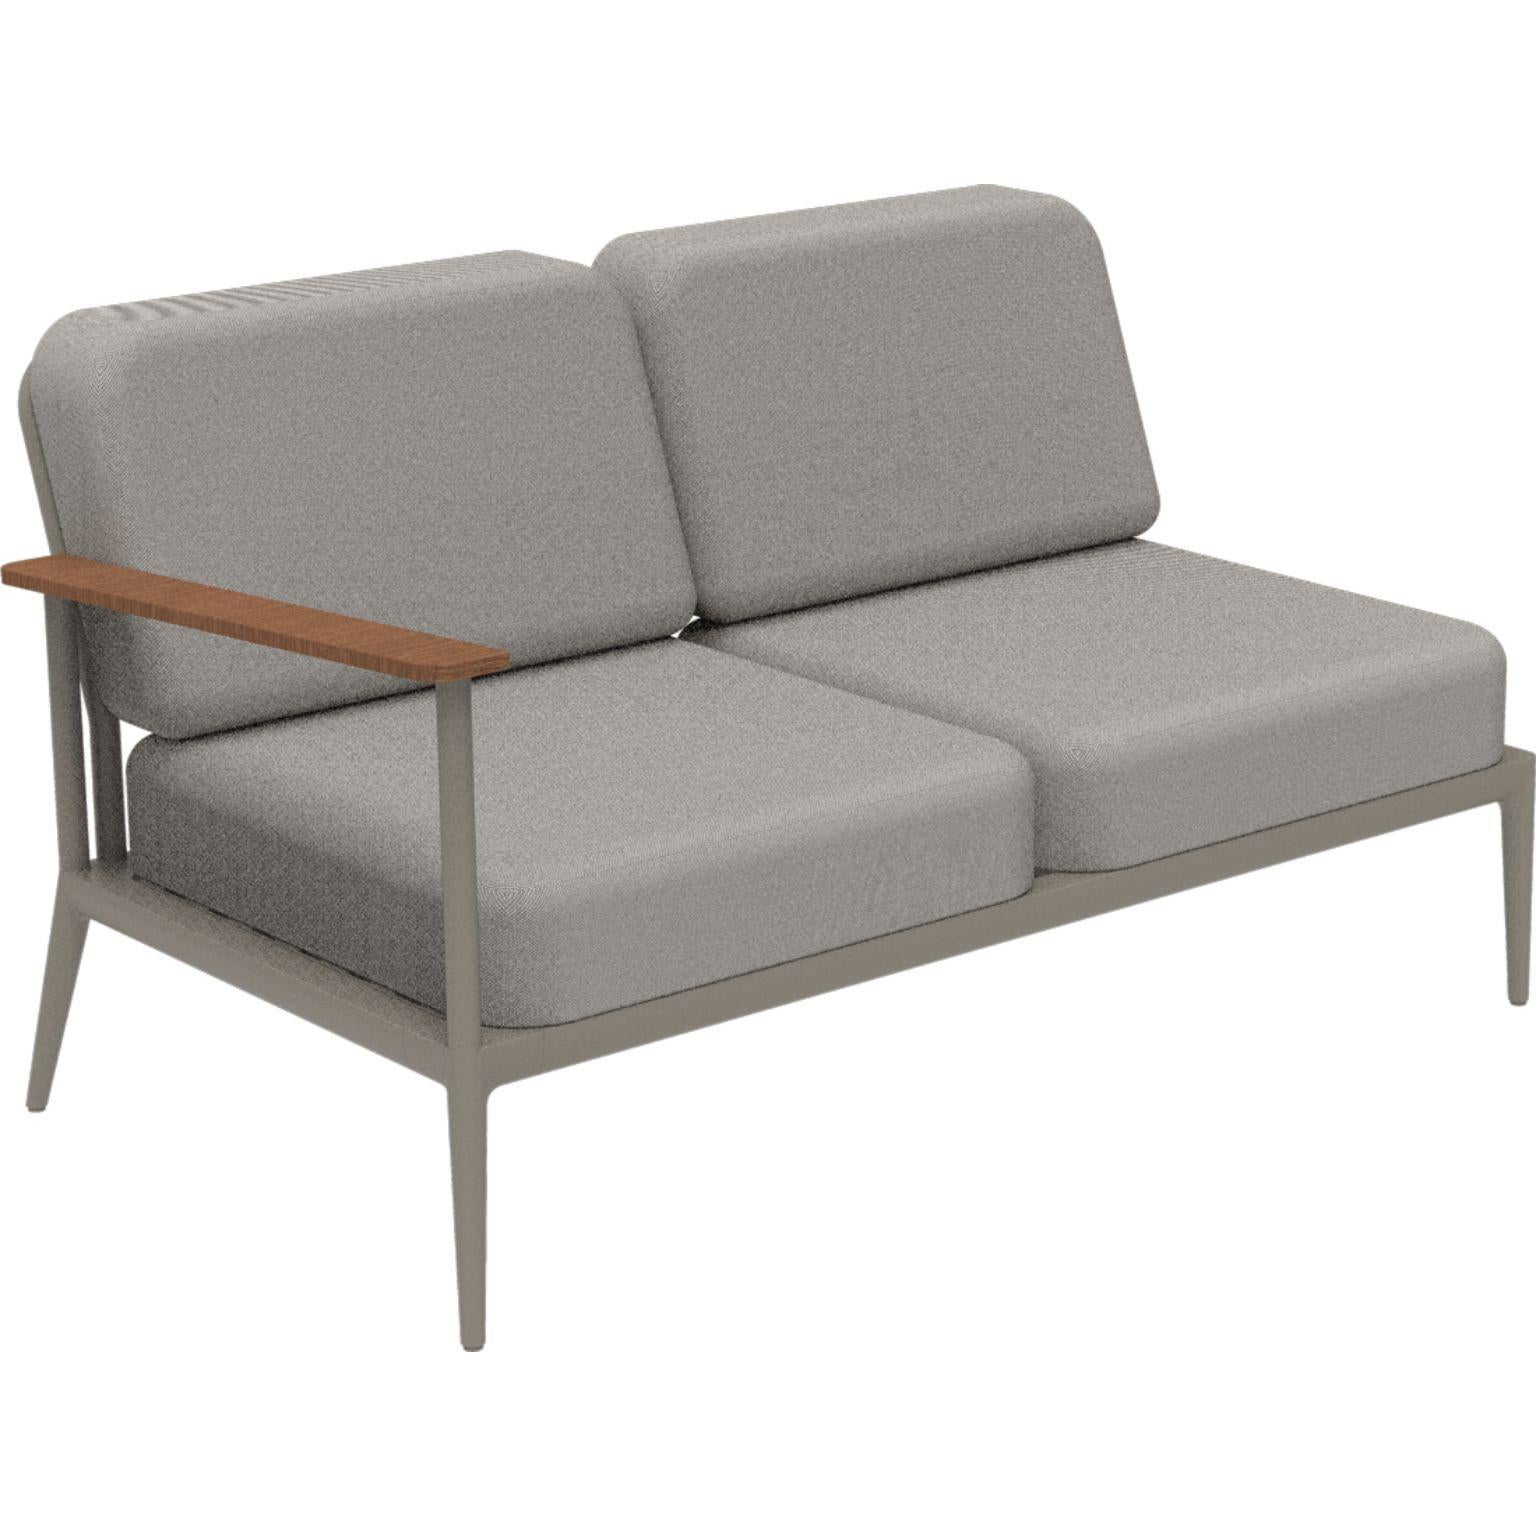 Nature cream double right modular sofa by MOWEE
Dimensions: D85 x W144 x H81 cm (seat height 42 cm).
Material: Aluminum, upholstery and Iroko Wood.
Weight: 29 kg.
Also available in different colors and finishes.

An unmistakable collection for